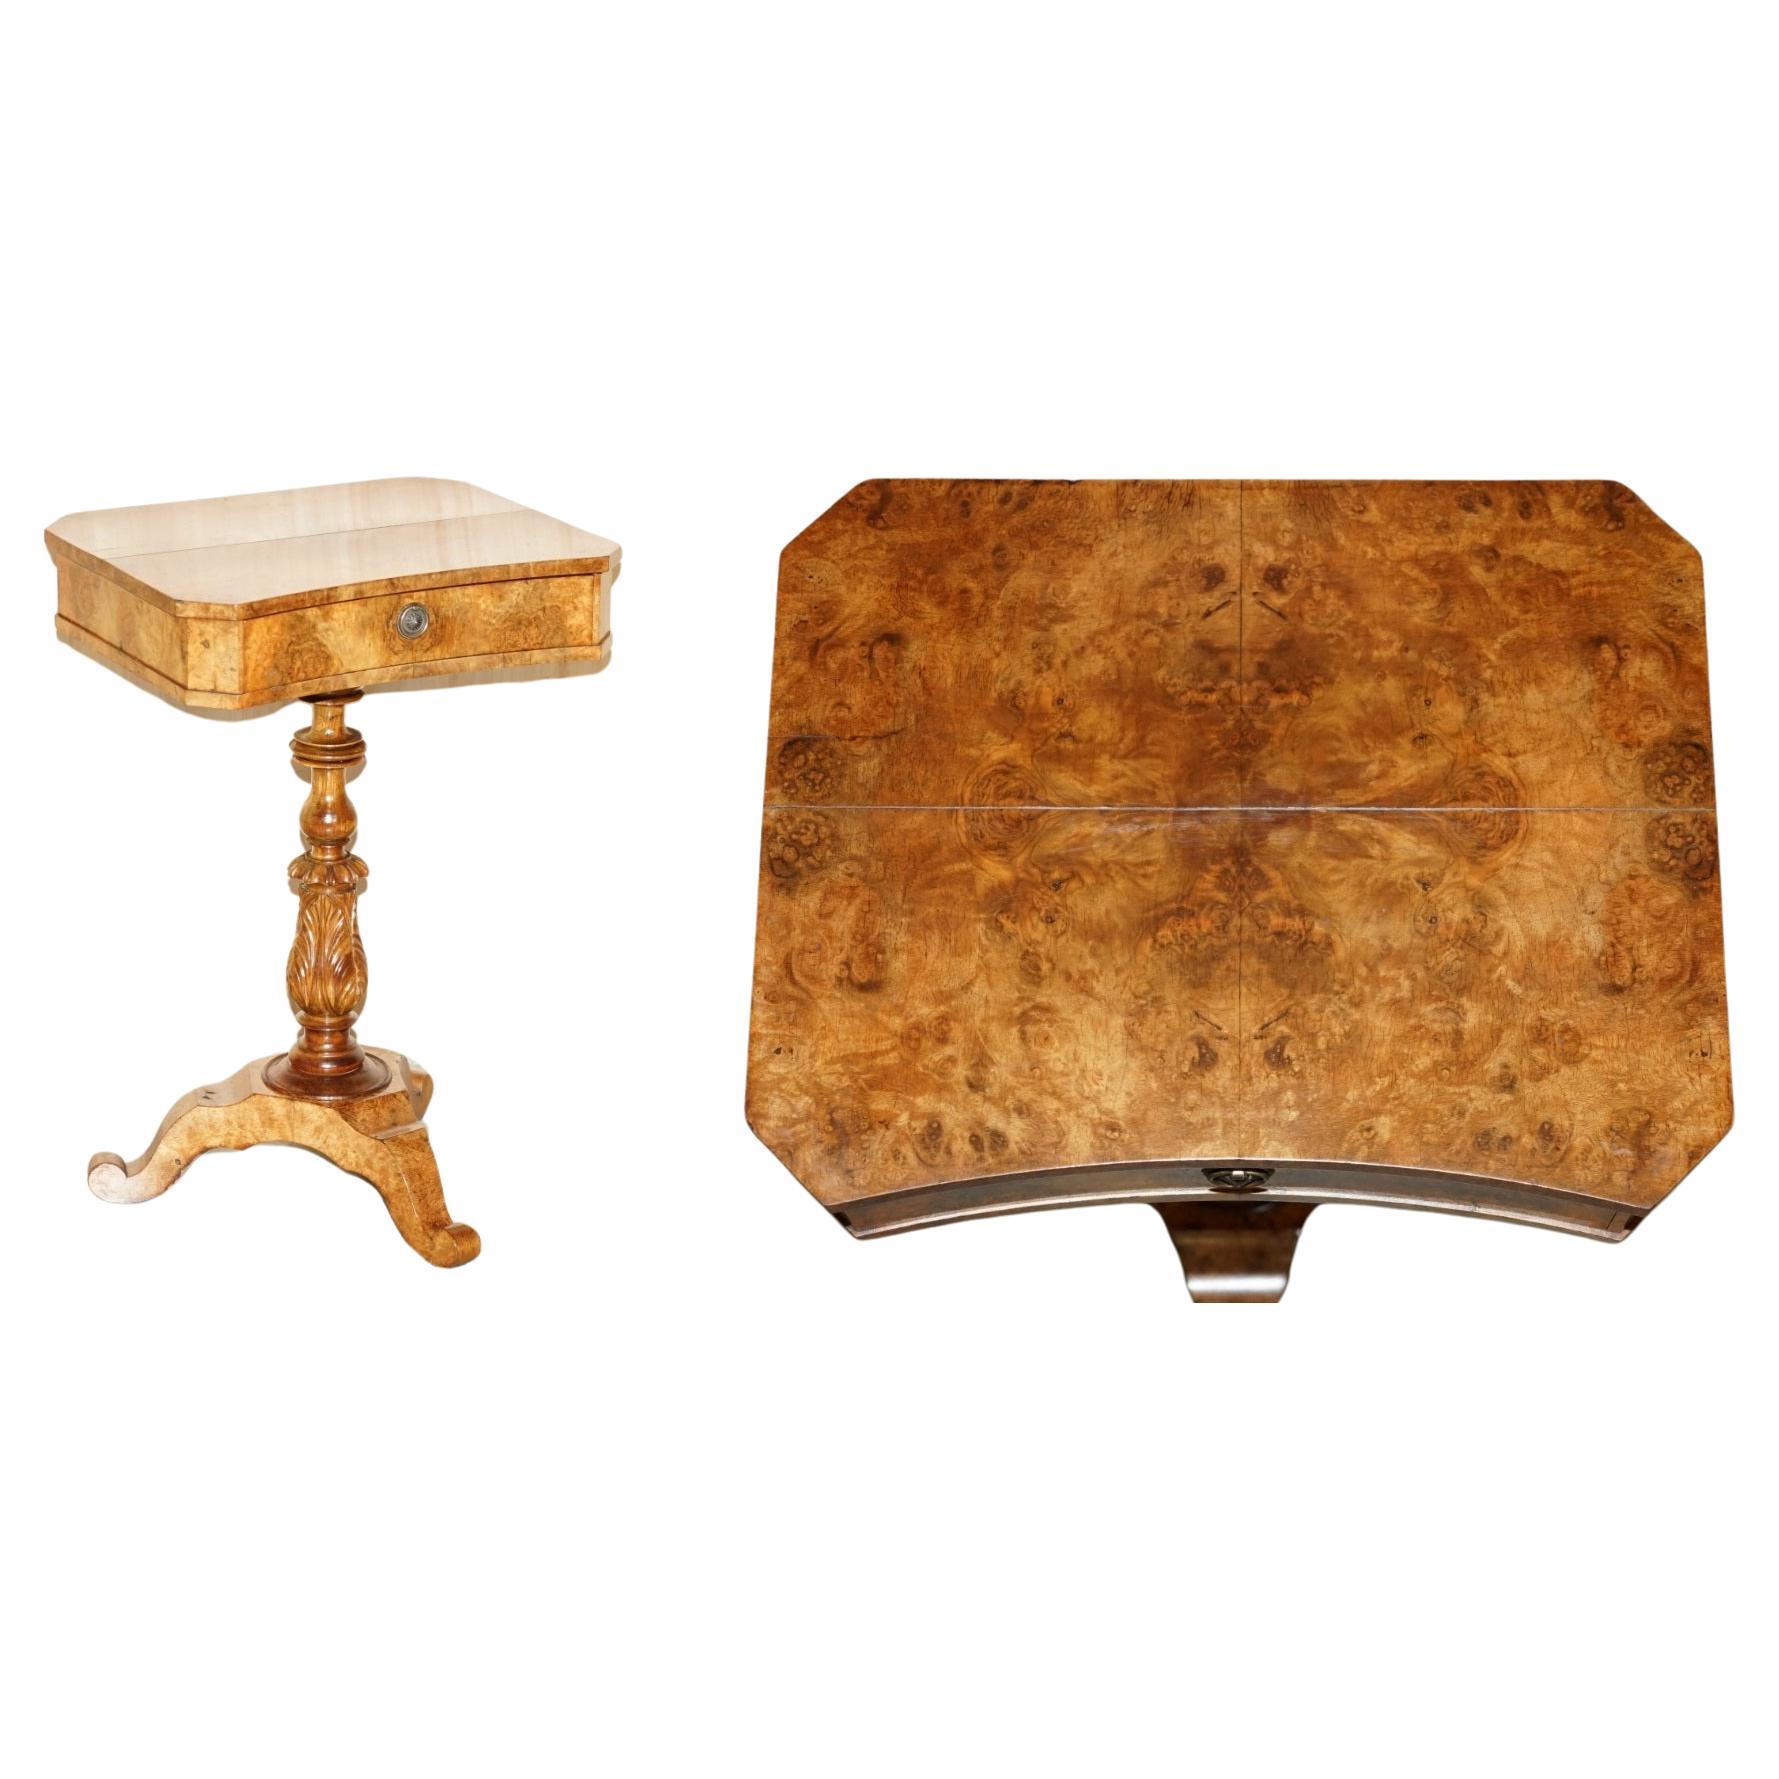 EXQUISITE QUALITY WILLIAM IV CIRCA 1830 BURR WALNUT SiDE END WORK SEWING TABLE For Sale